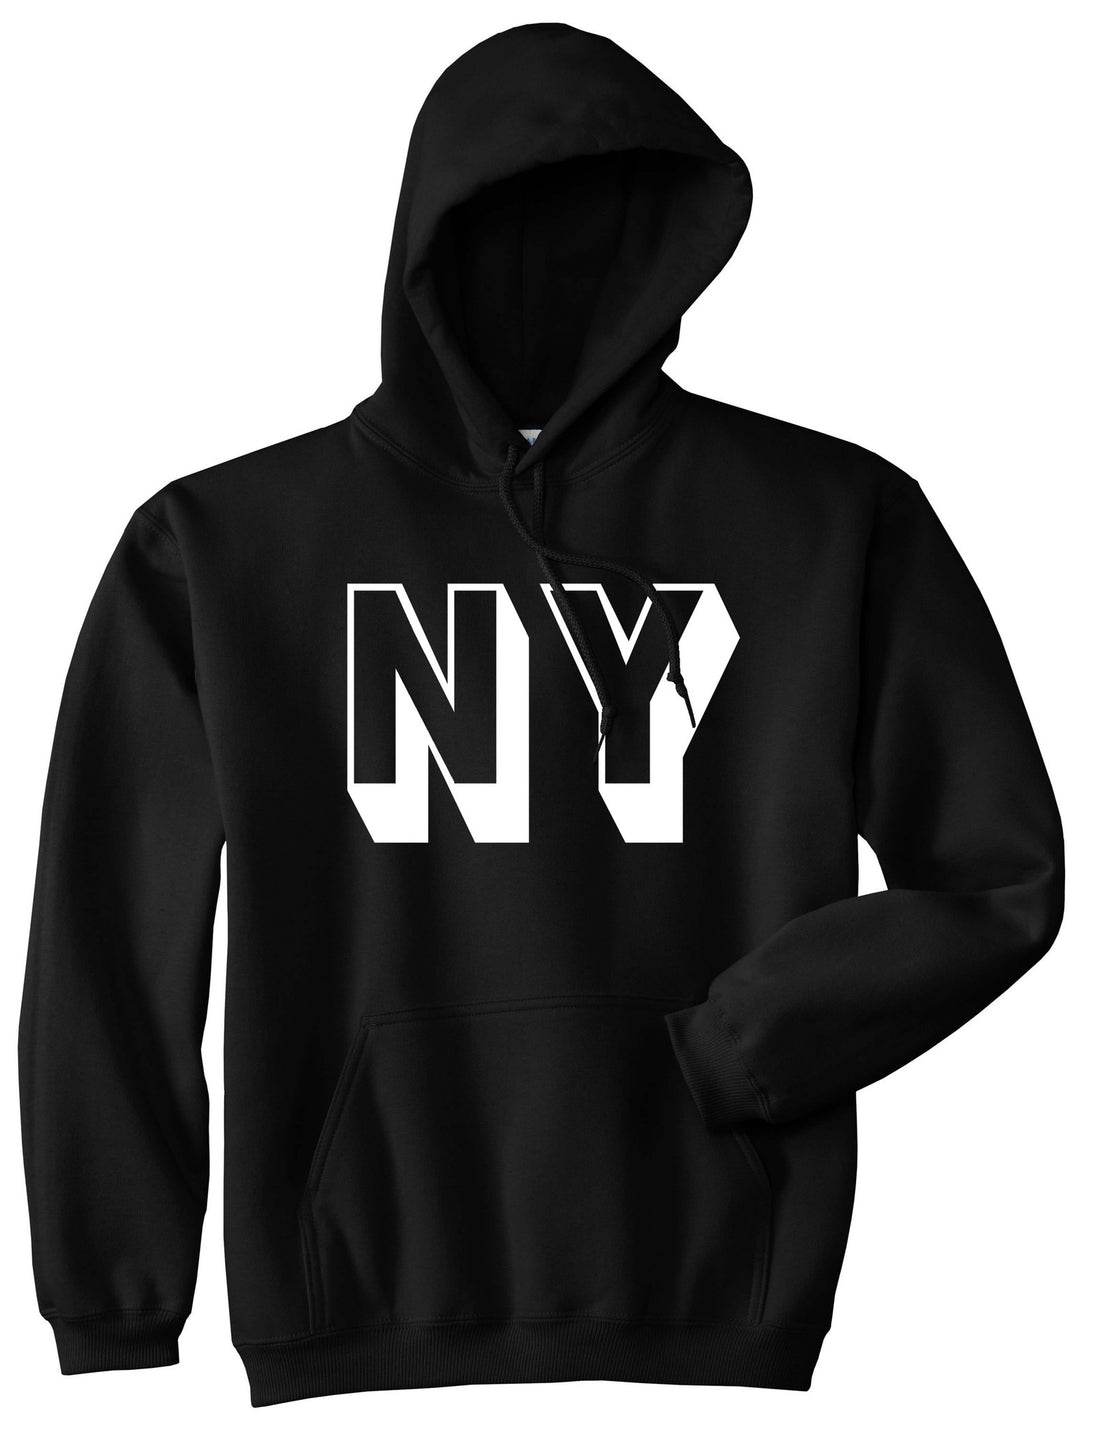 NY Block Letter New York Pullover Hoodie in Black By Kings Of NY